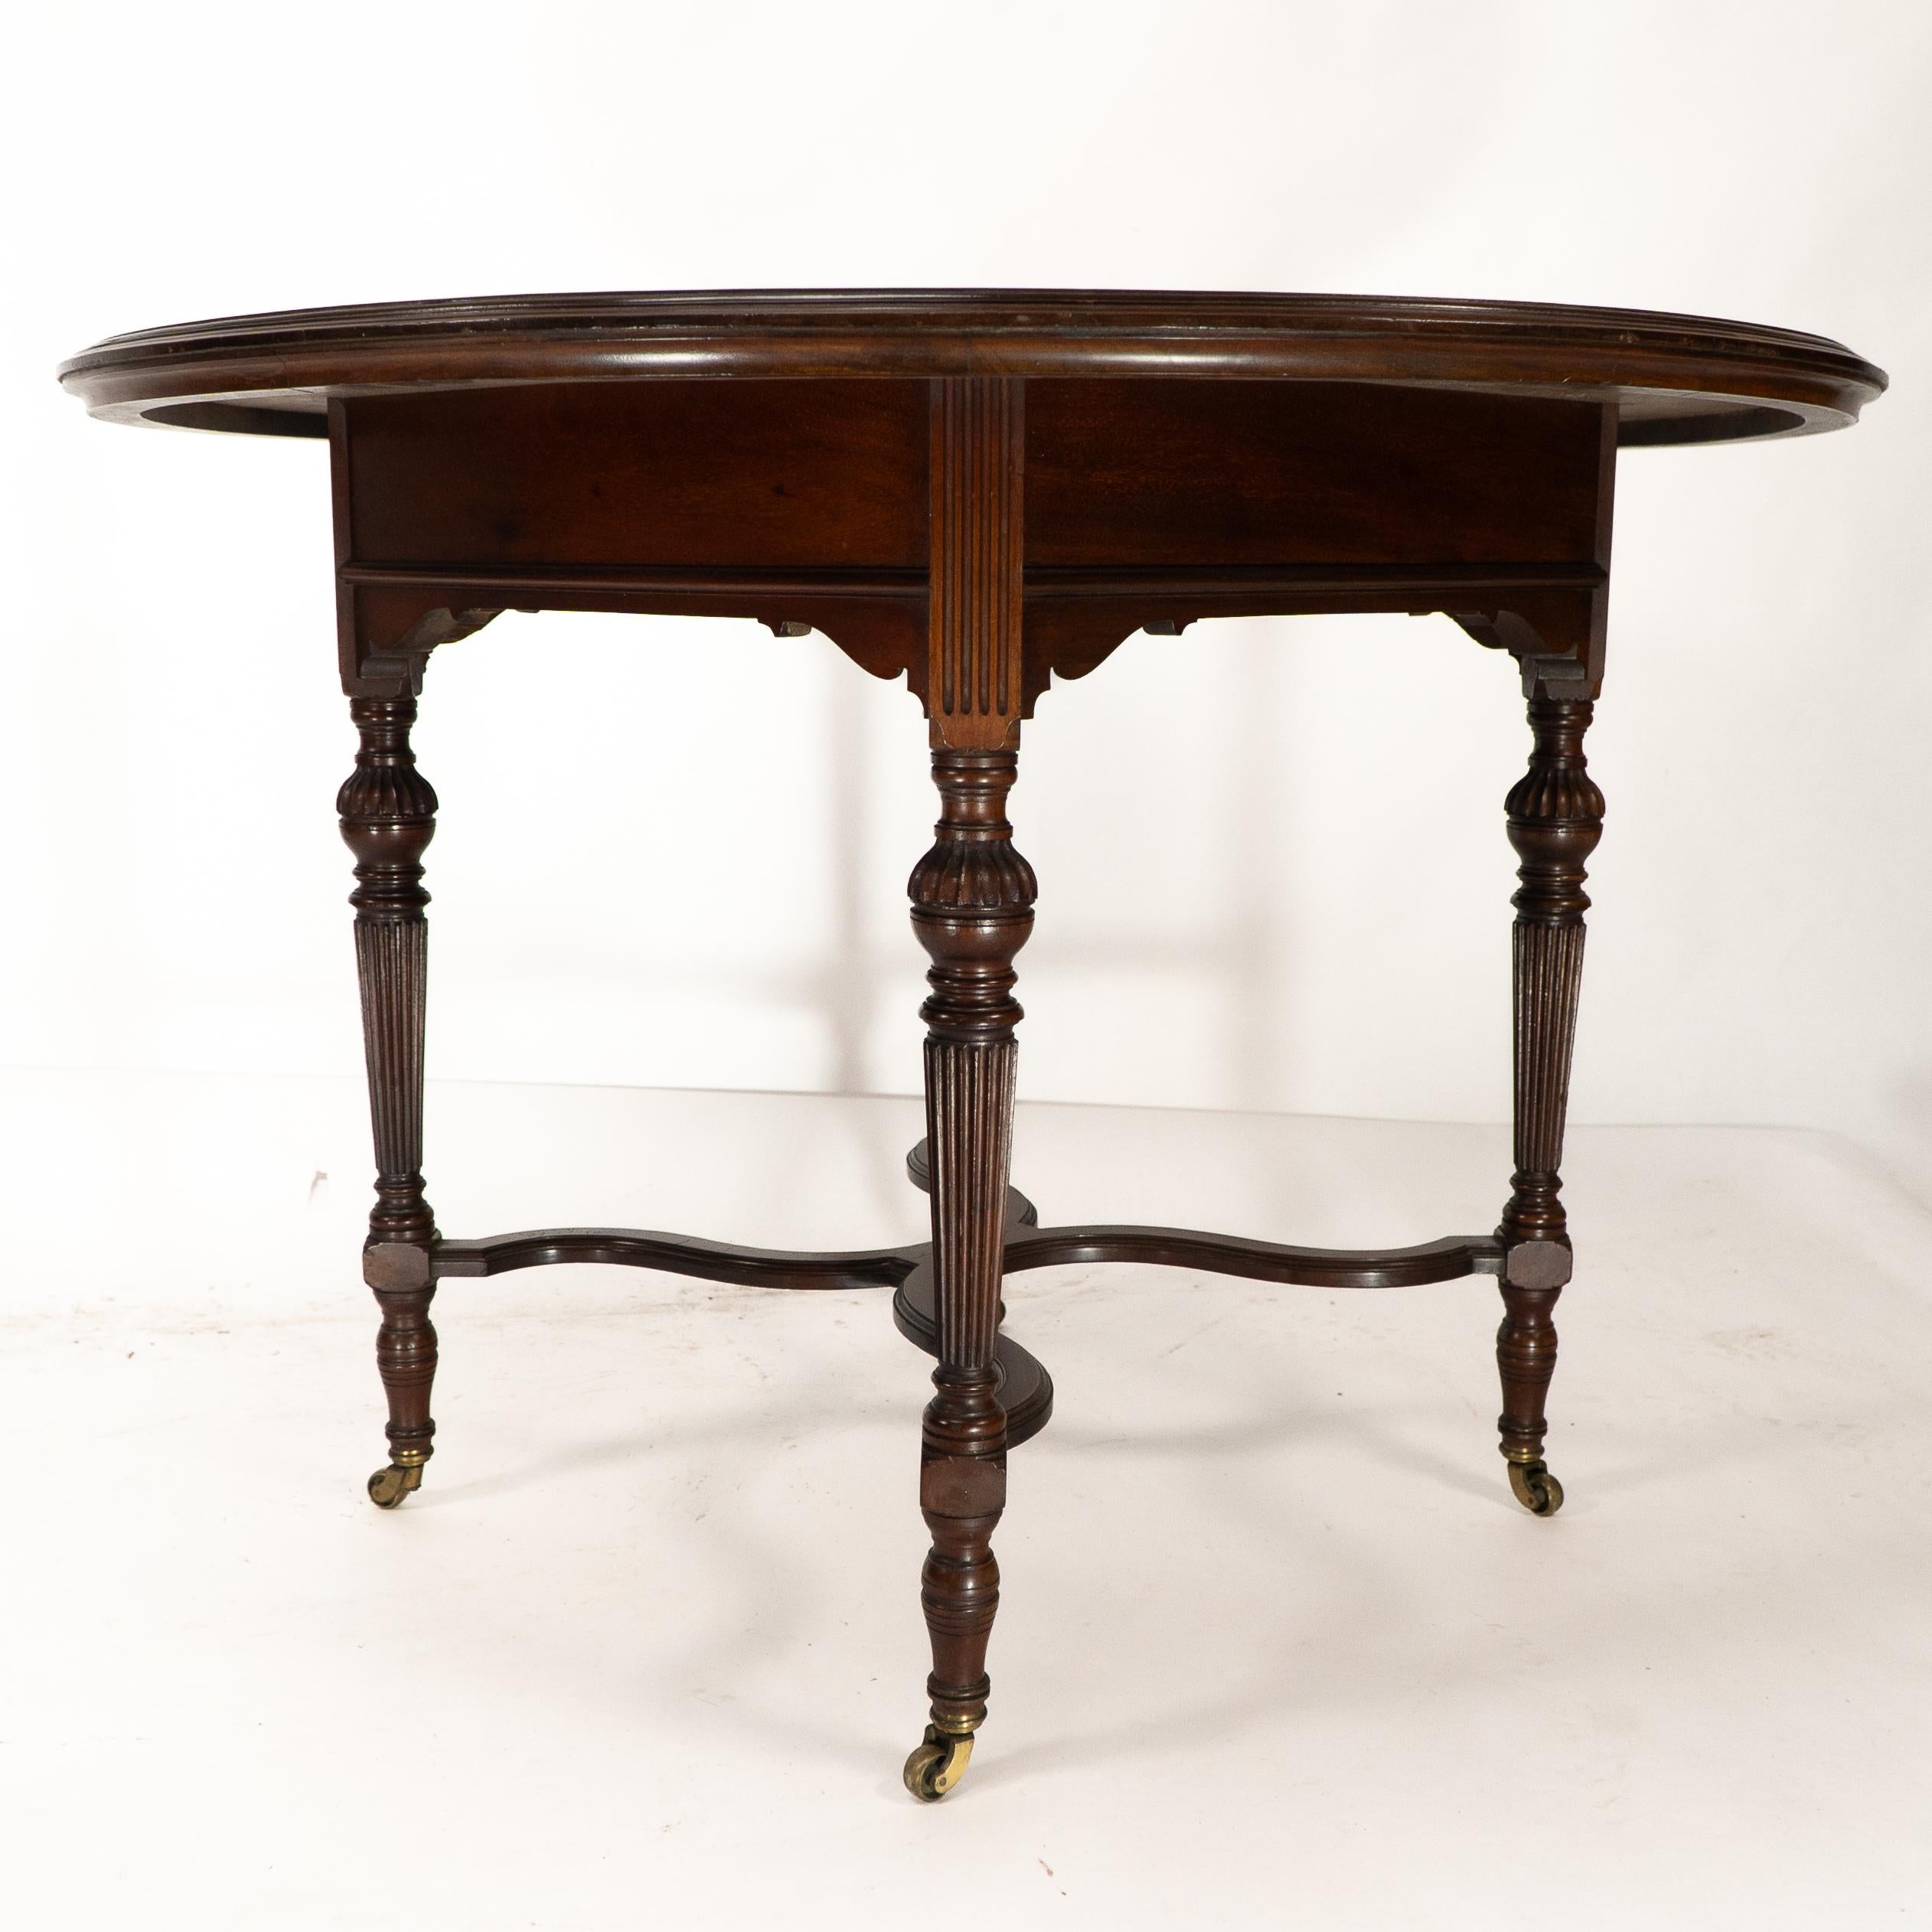 Collinson & Lock attributed. An Aesthetic Movement walnut circular center table For Sale 8